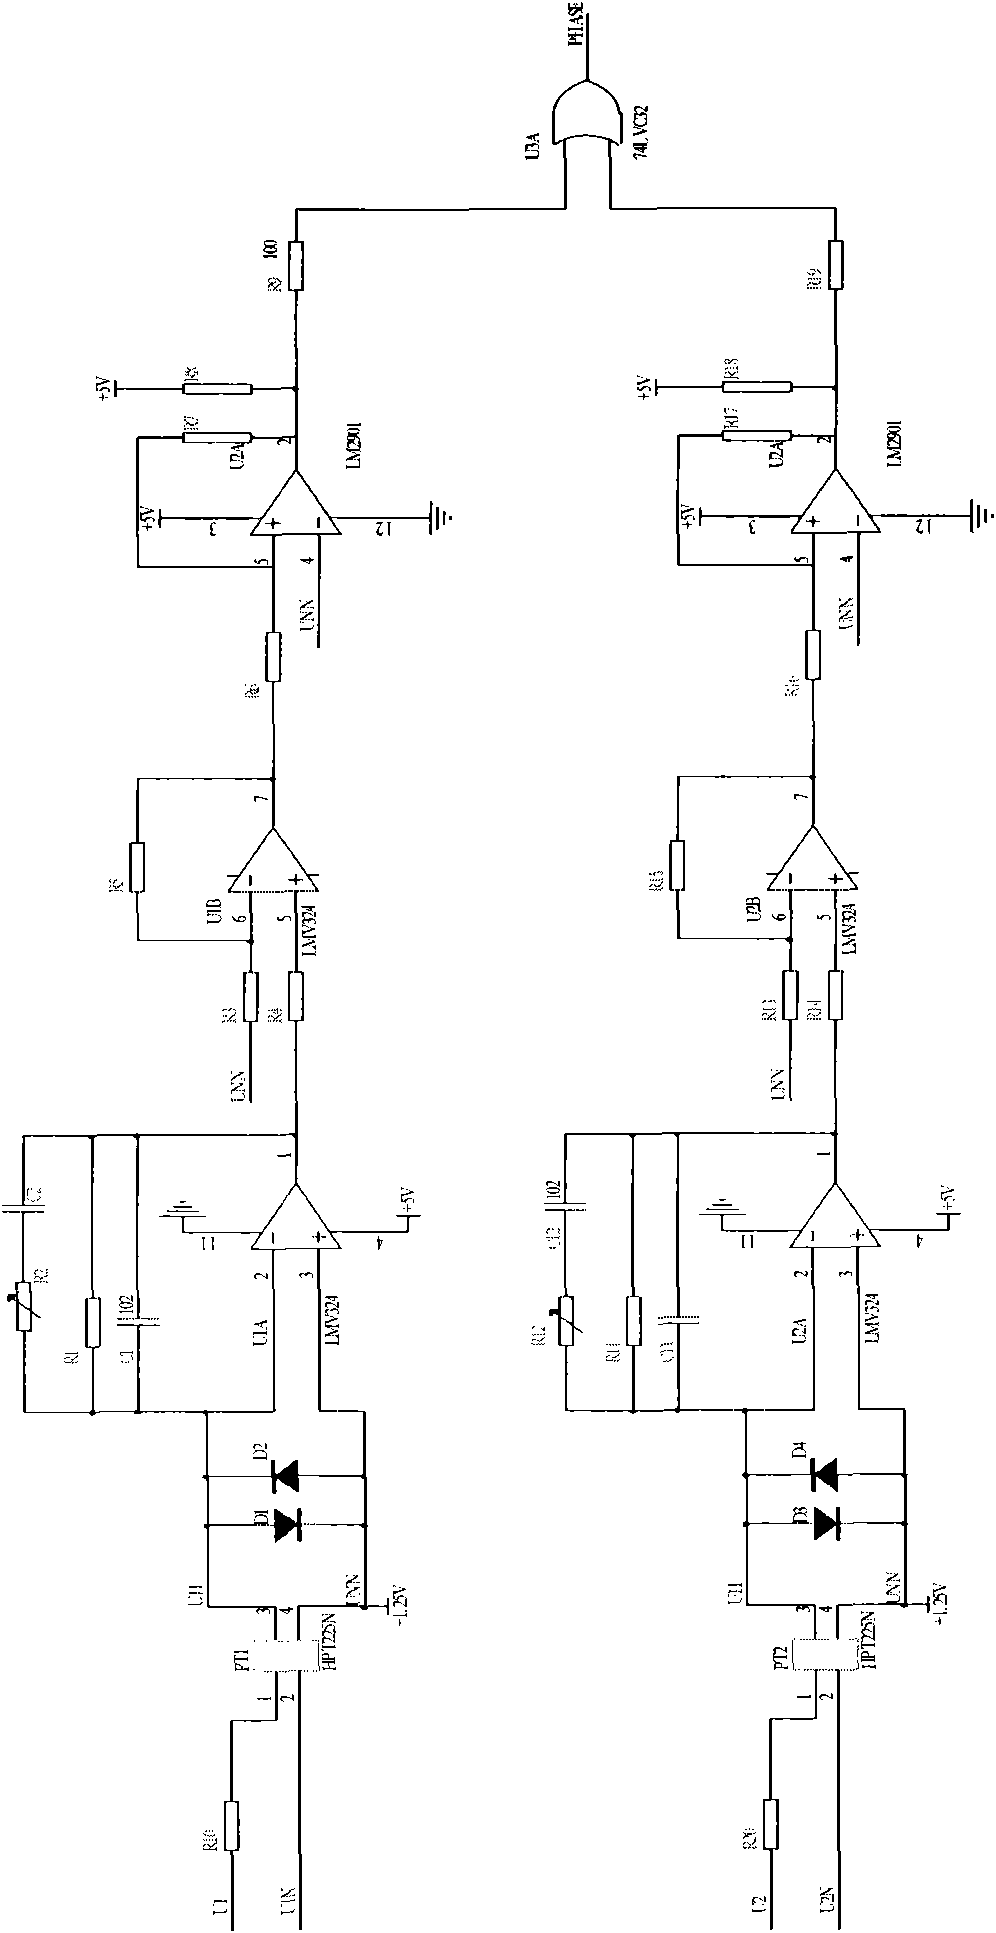 Optimization method based on traditional phase difference measurement and circuit